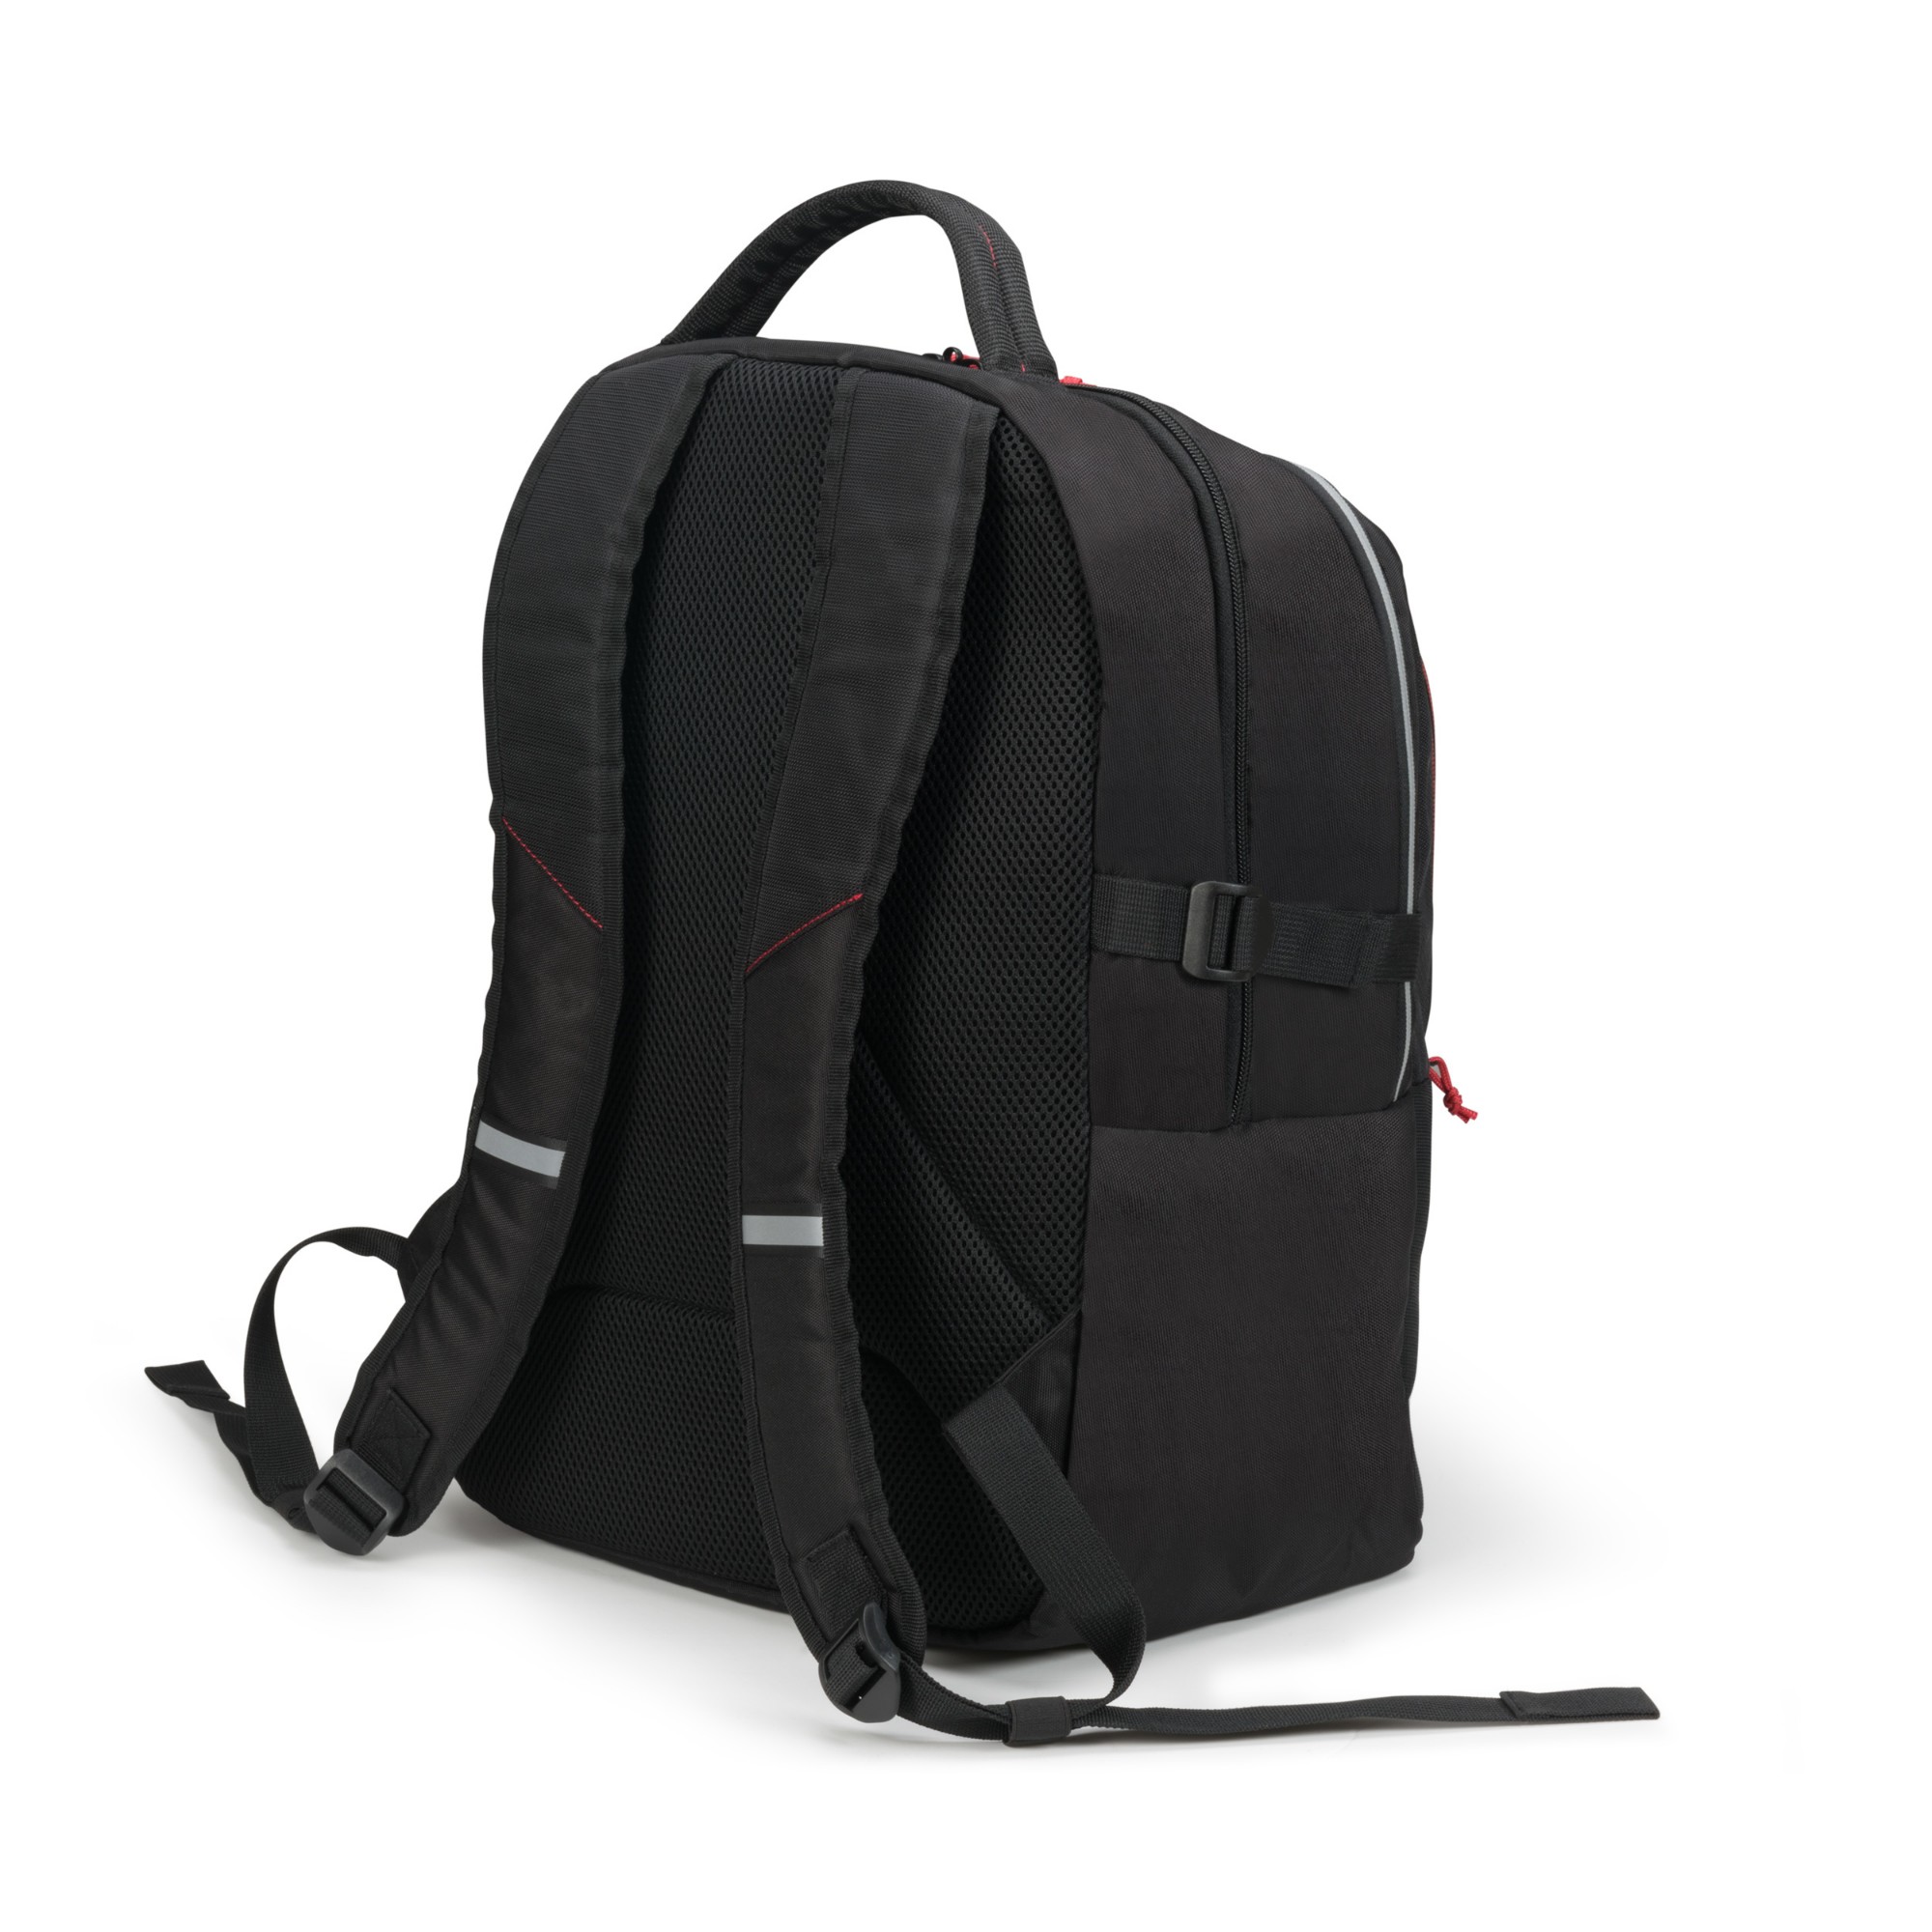 DICOTA Backpack Plus SPIN 14-15.6, 136 in distributor/wholesale stock ...